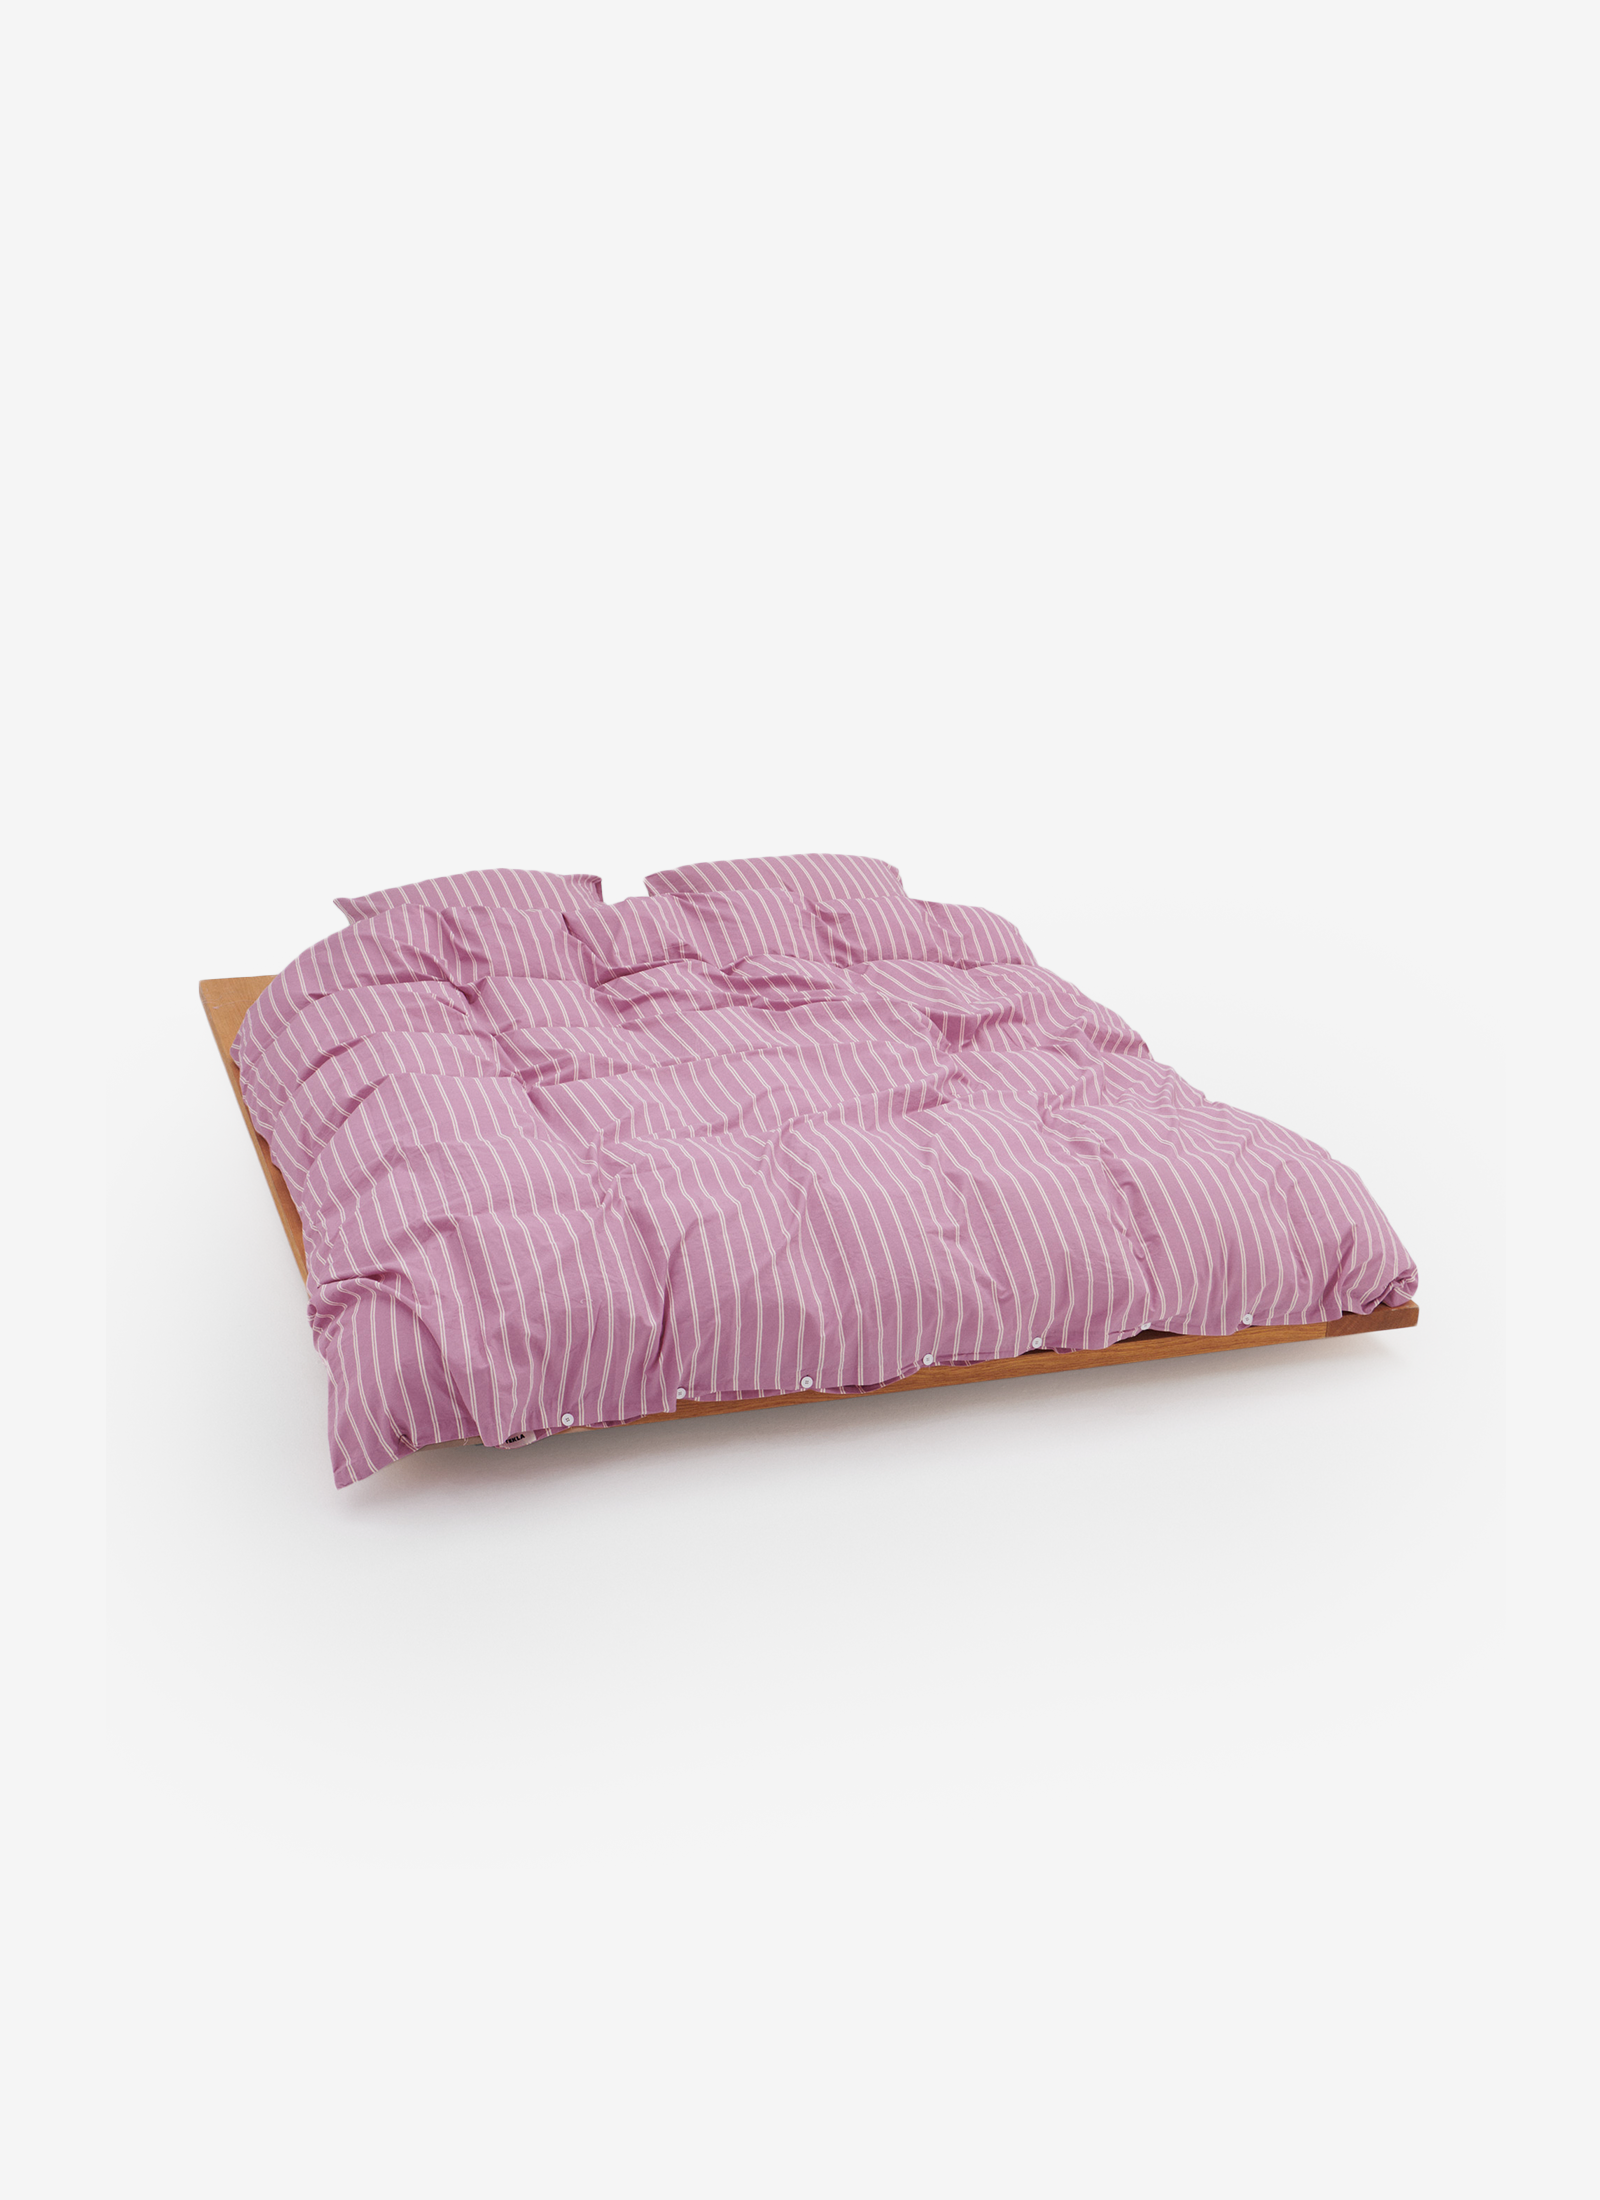 Duvet Cover in Mallow Pink STRIPES